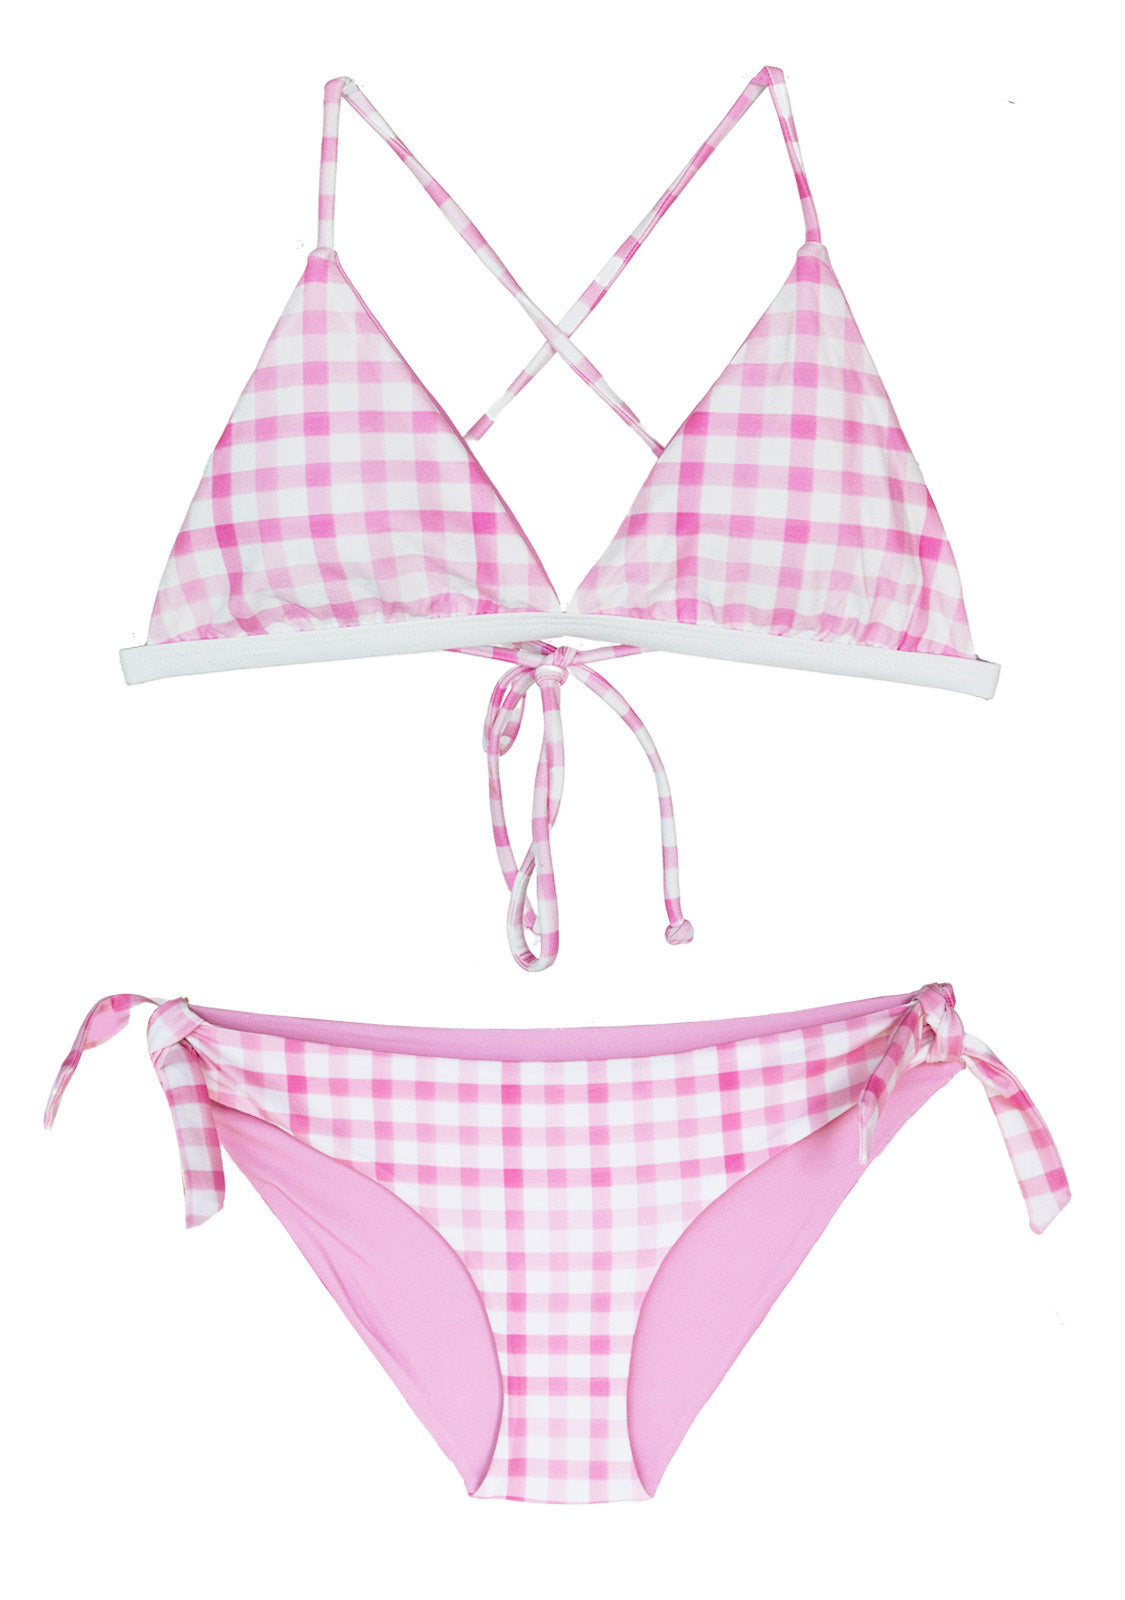 Chance-Loves swimwear gingham-style pink-white checkered swimsuit 2-piece reversible with padded top for Teenager Junior girls